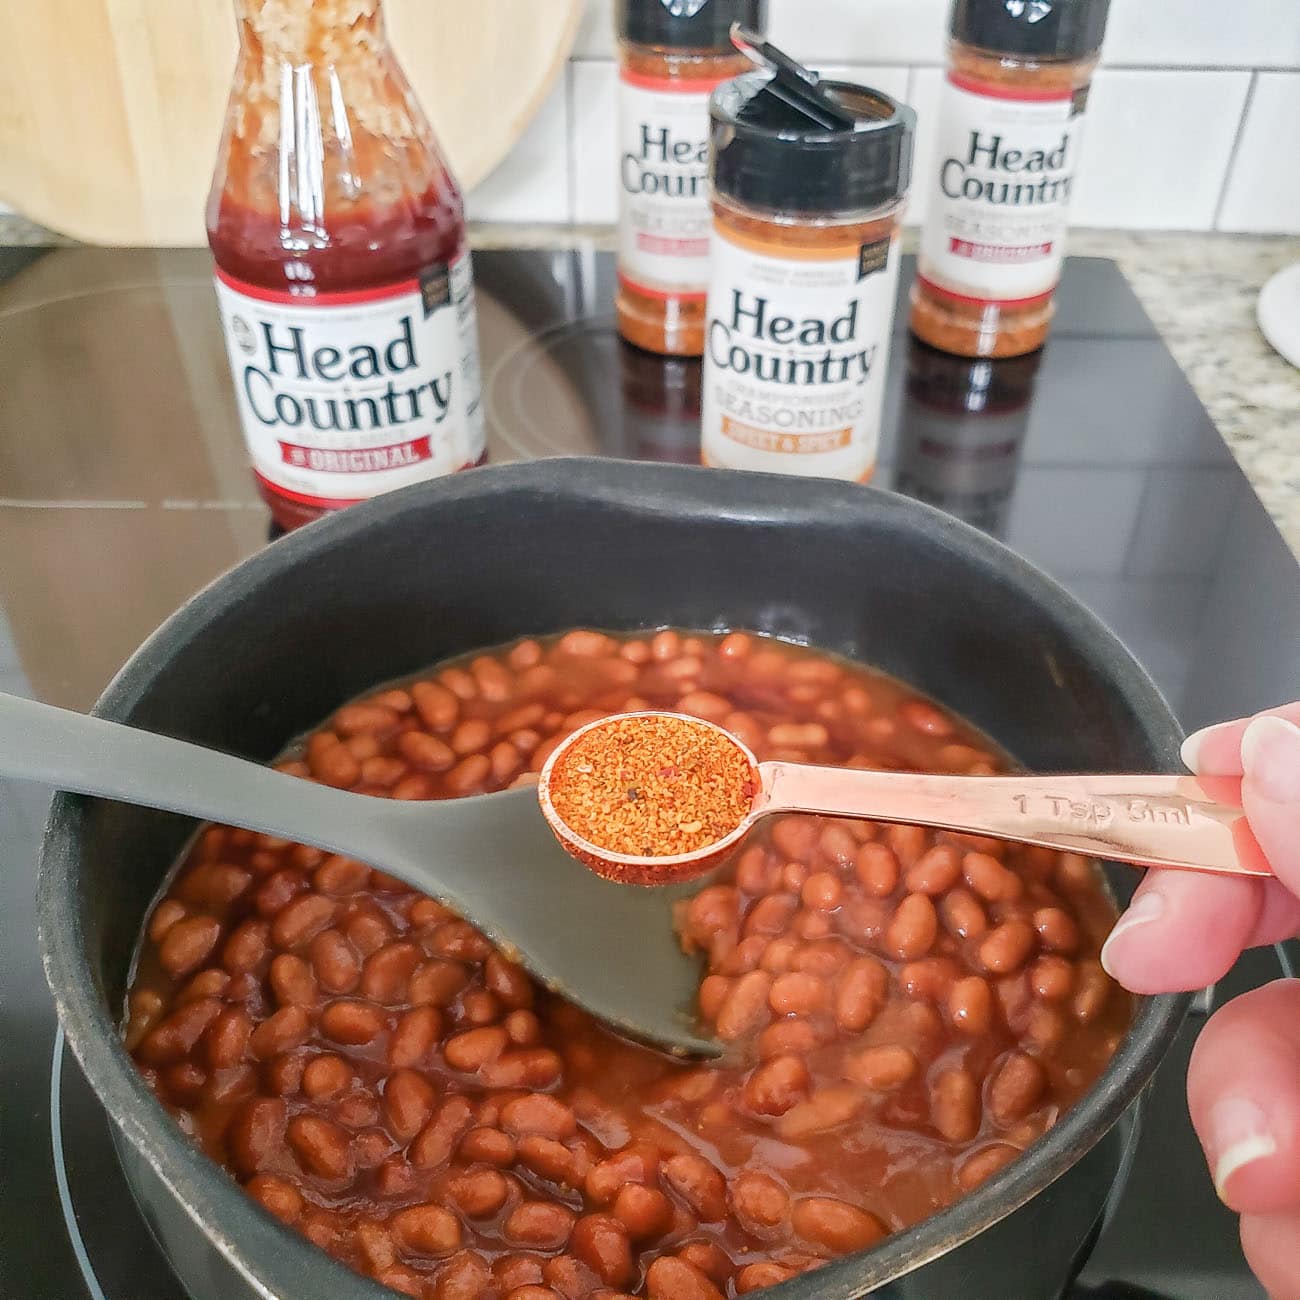 Head Country seasoning being added to baked beans